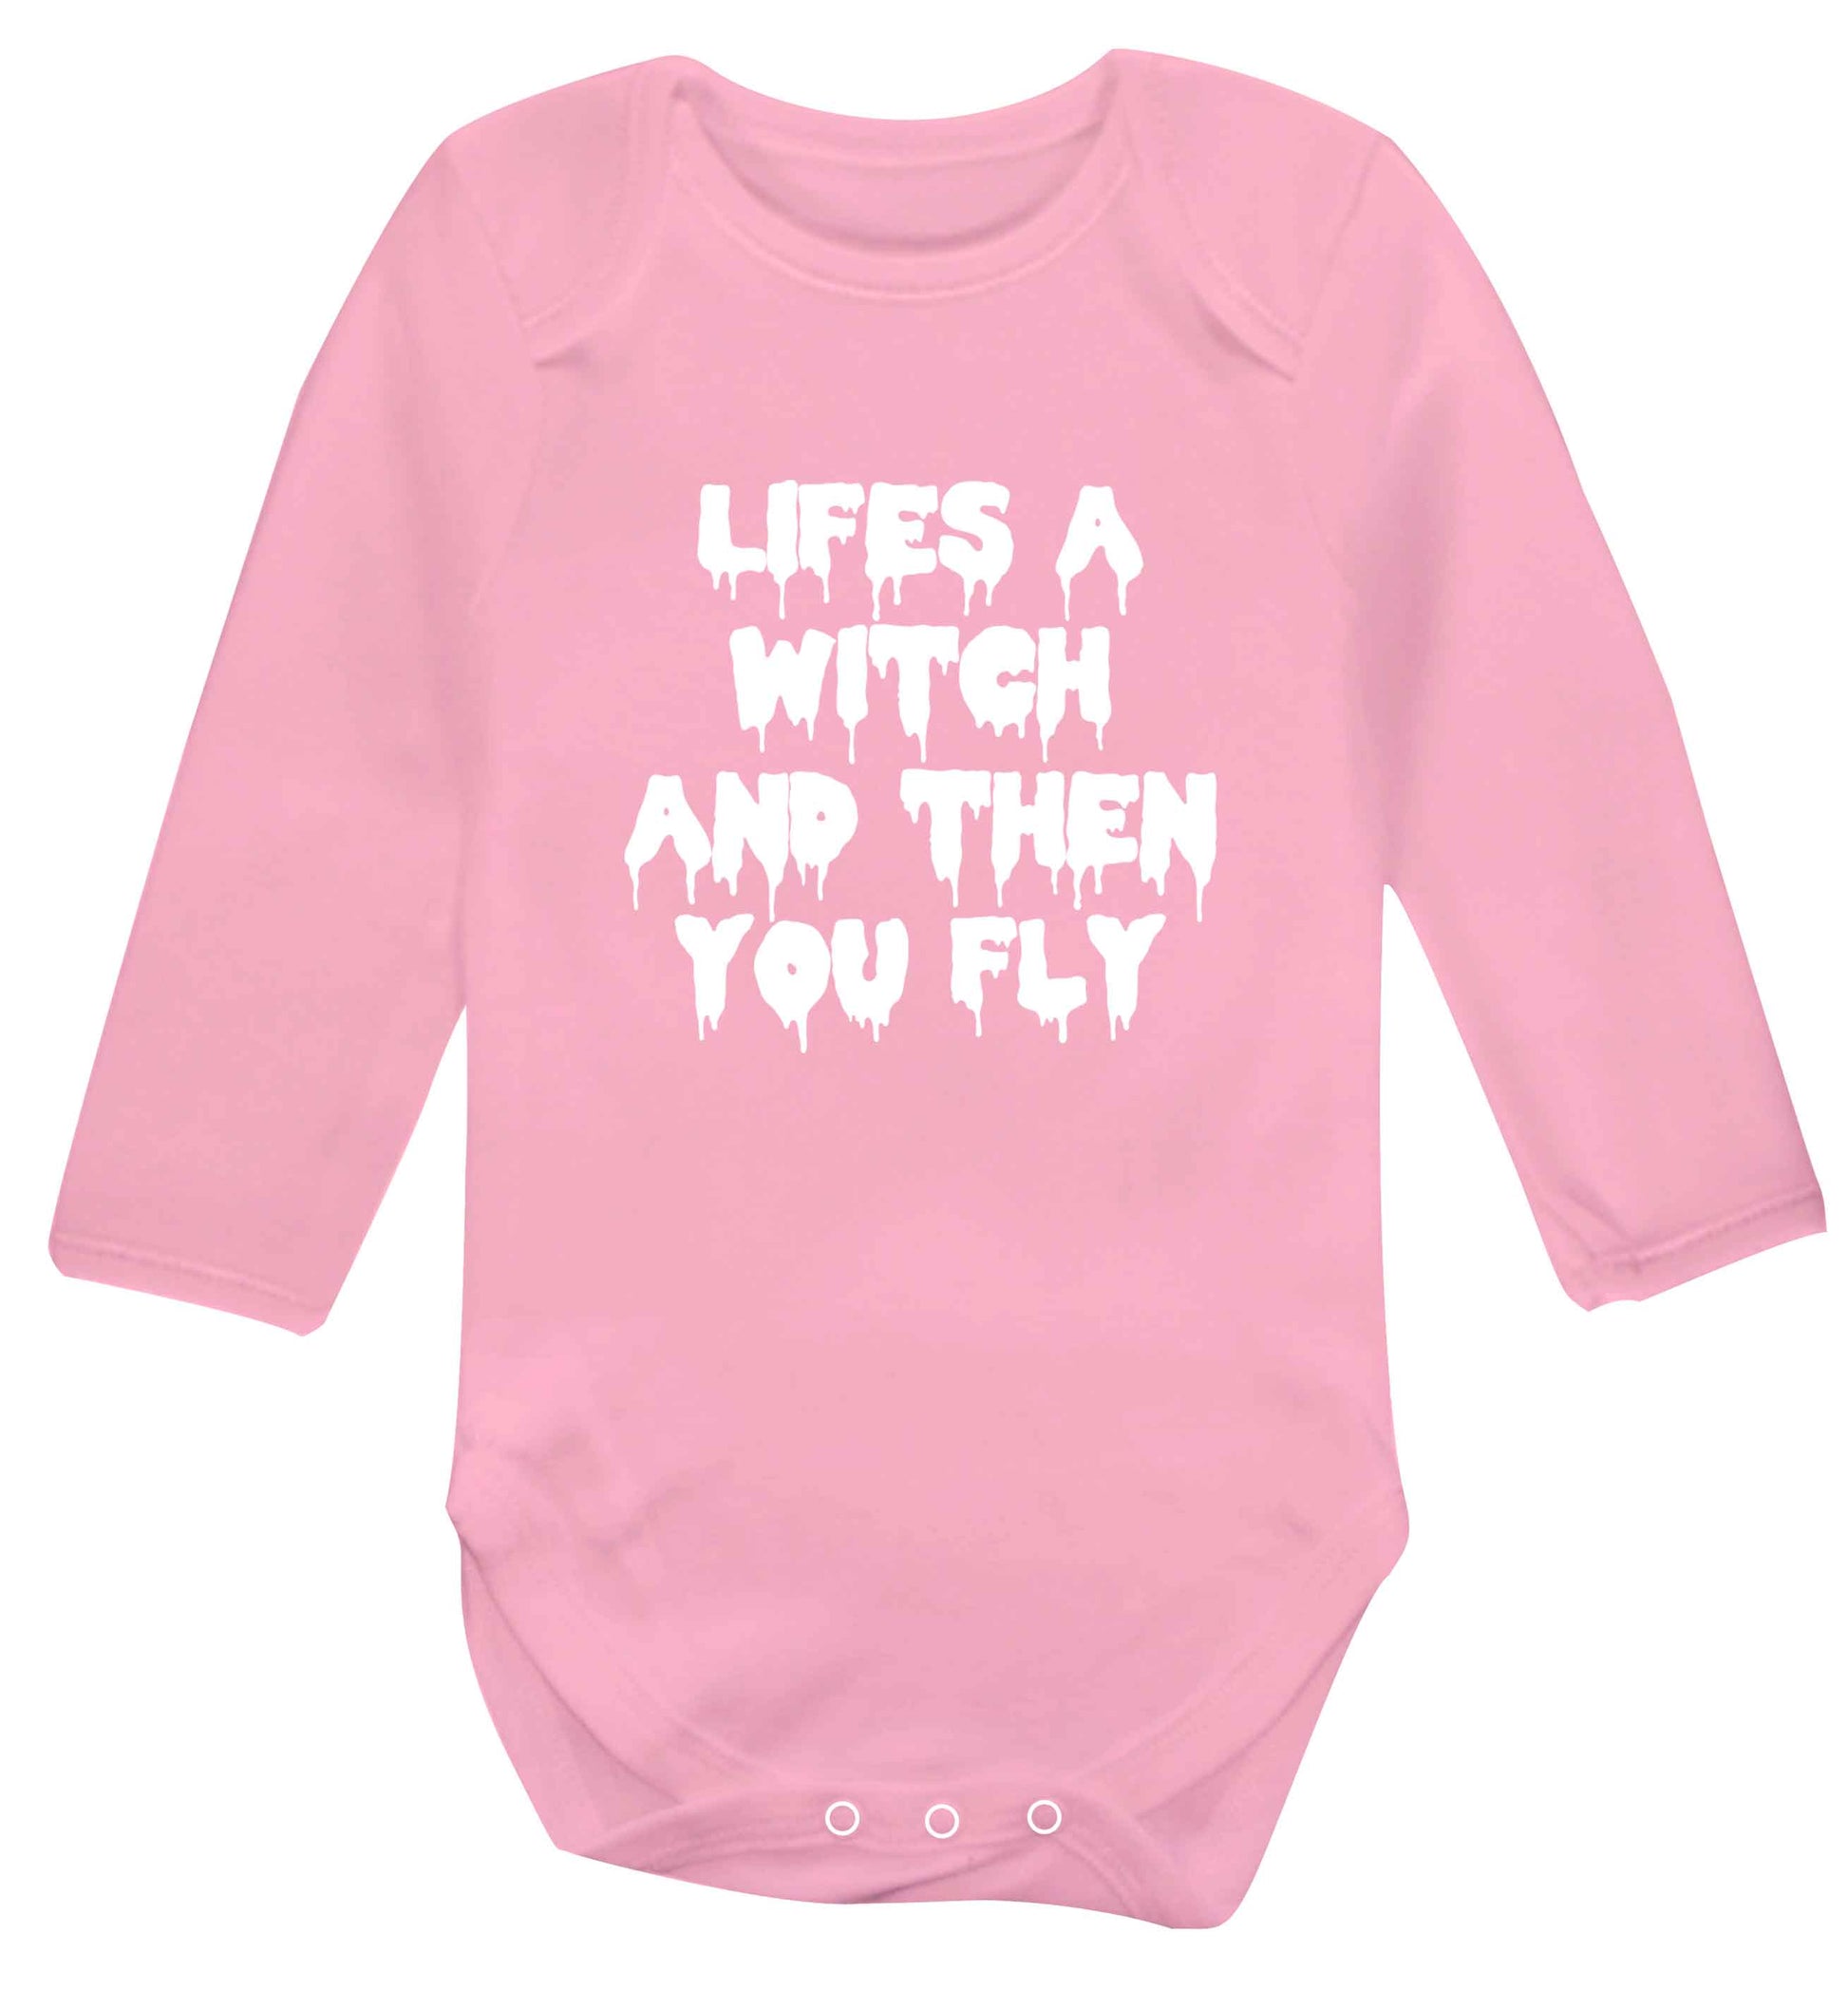 Life's a witch and then you fly baby vest long sleeved pale pink 6-12 months